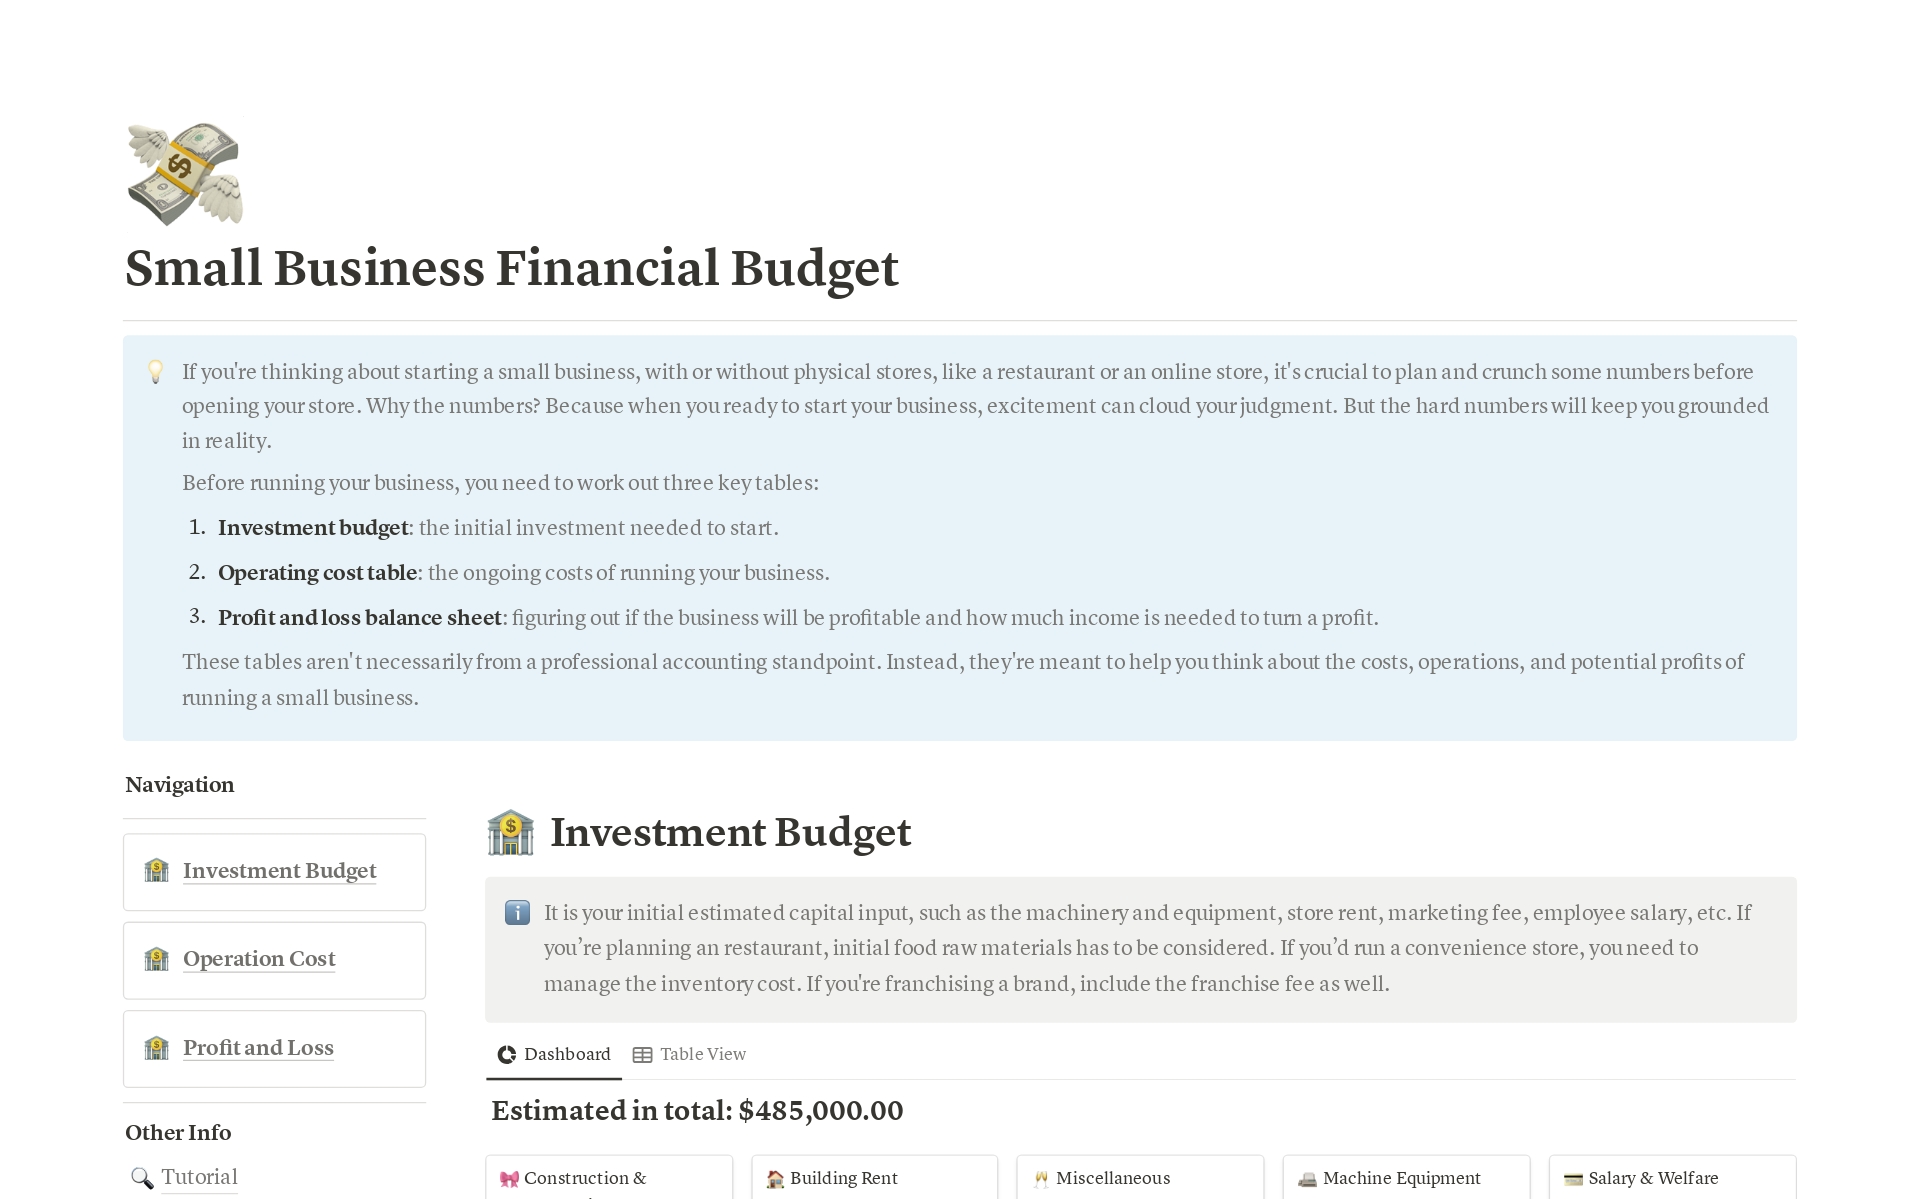 If you're thinking about running a small business, this template helps to identify your initial investment budget needed, operating cost of ongoing running the business, and figuring out if how much income is need to turn your business profitable.